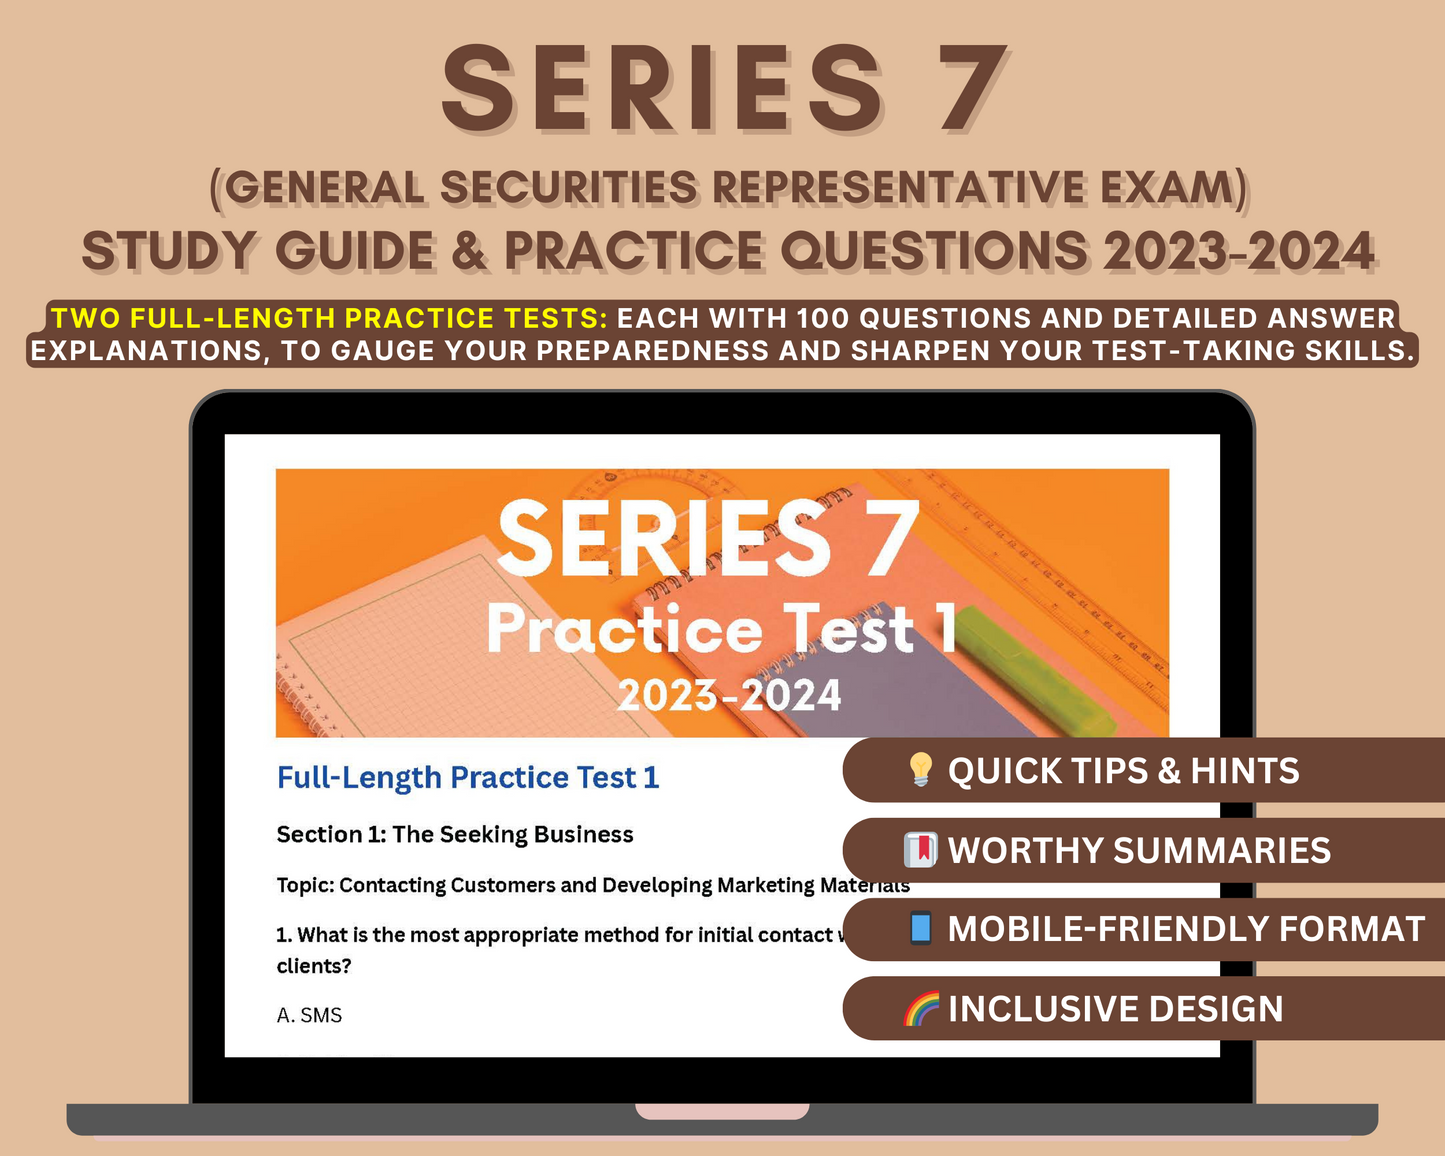 FINRA's Series 7 Exam Study Guide 2023-2024: In-Depth Content Review, Practice Tests & Exam Tips for Financial Success